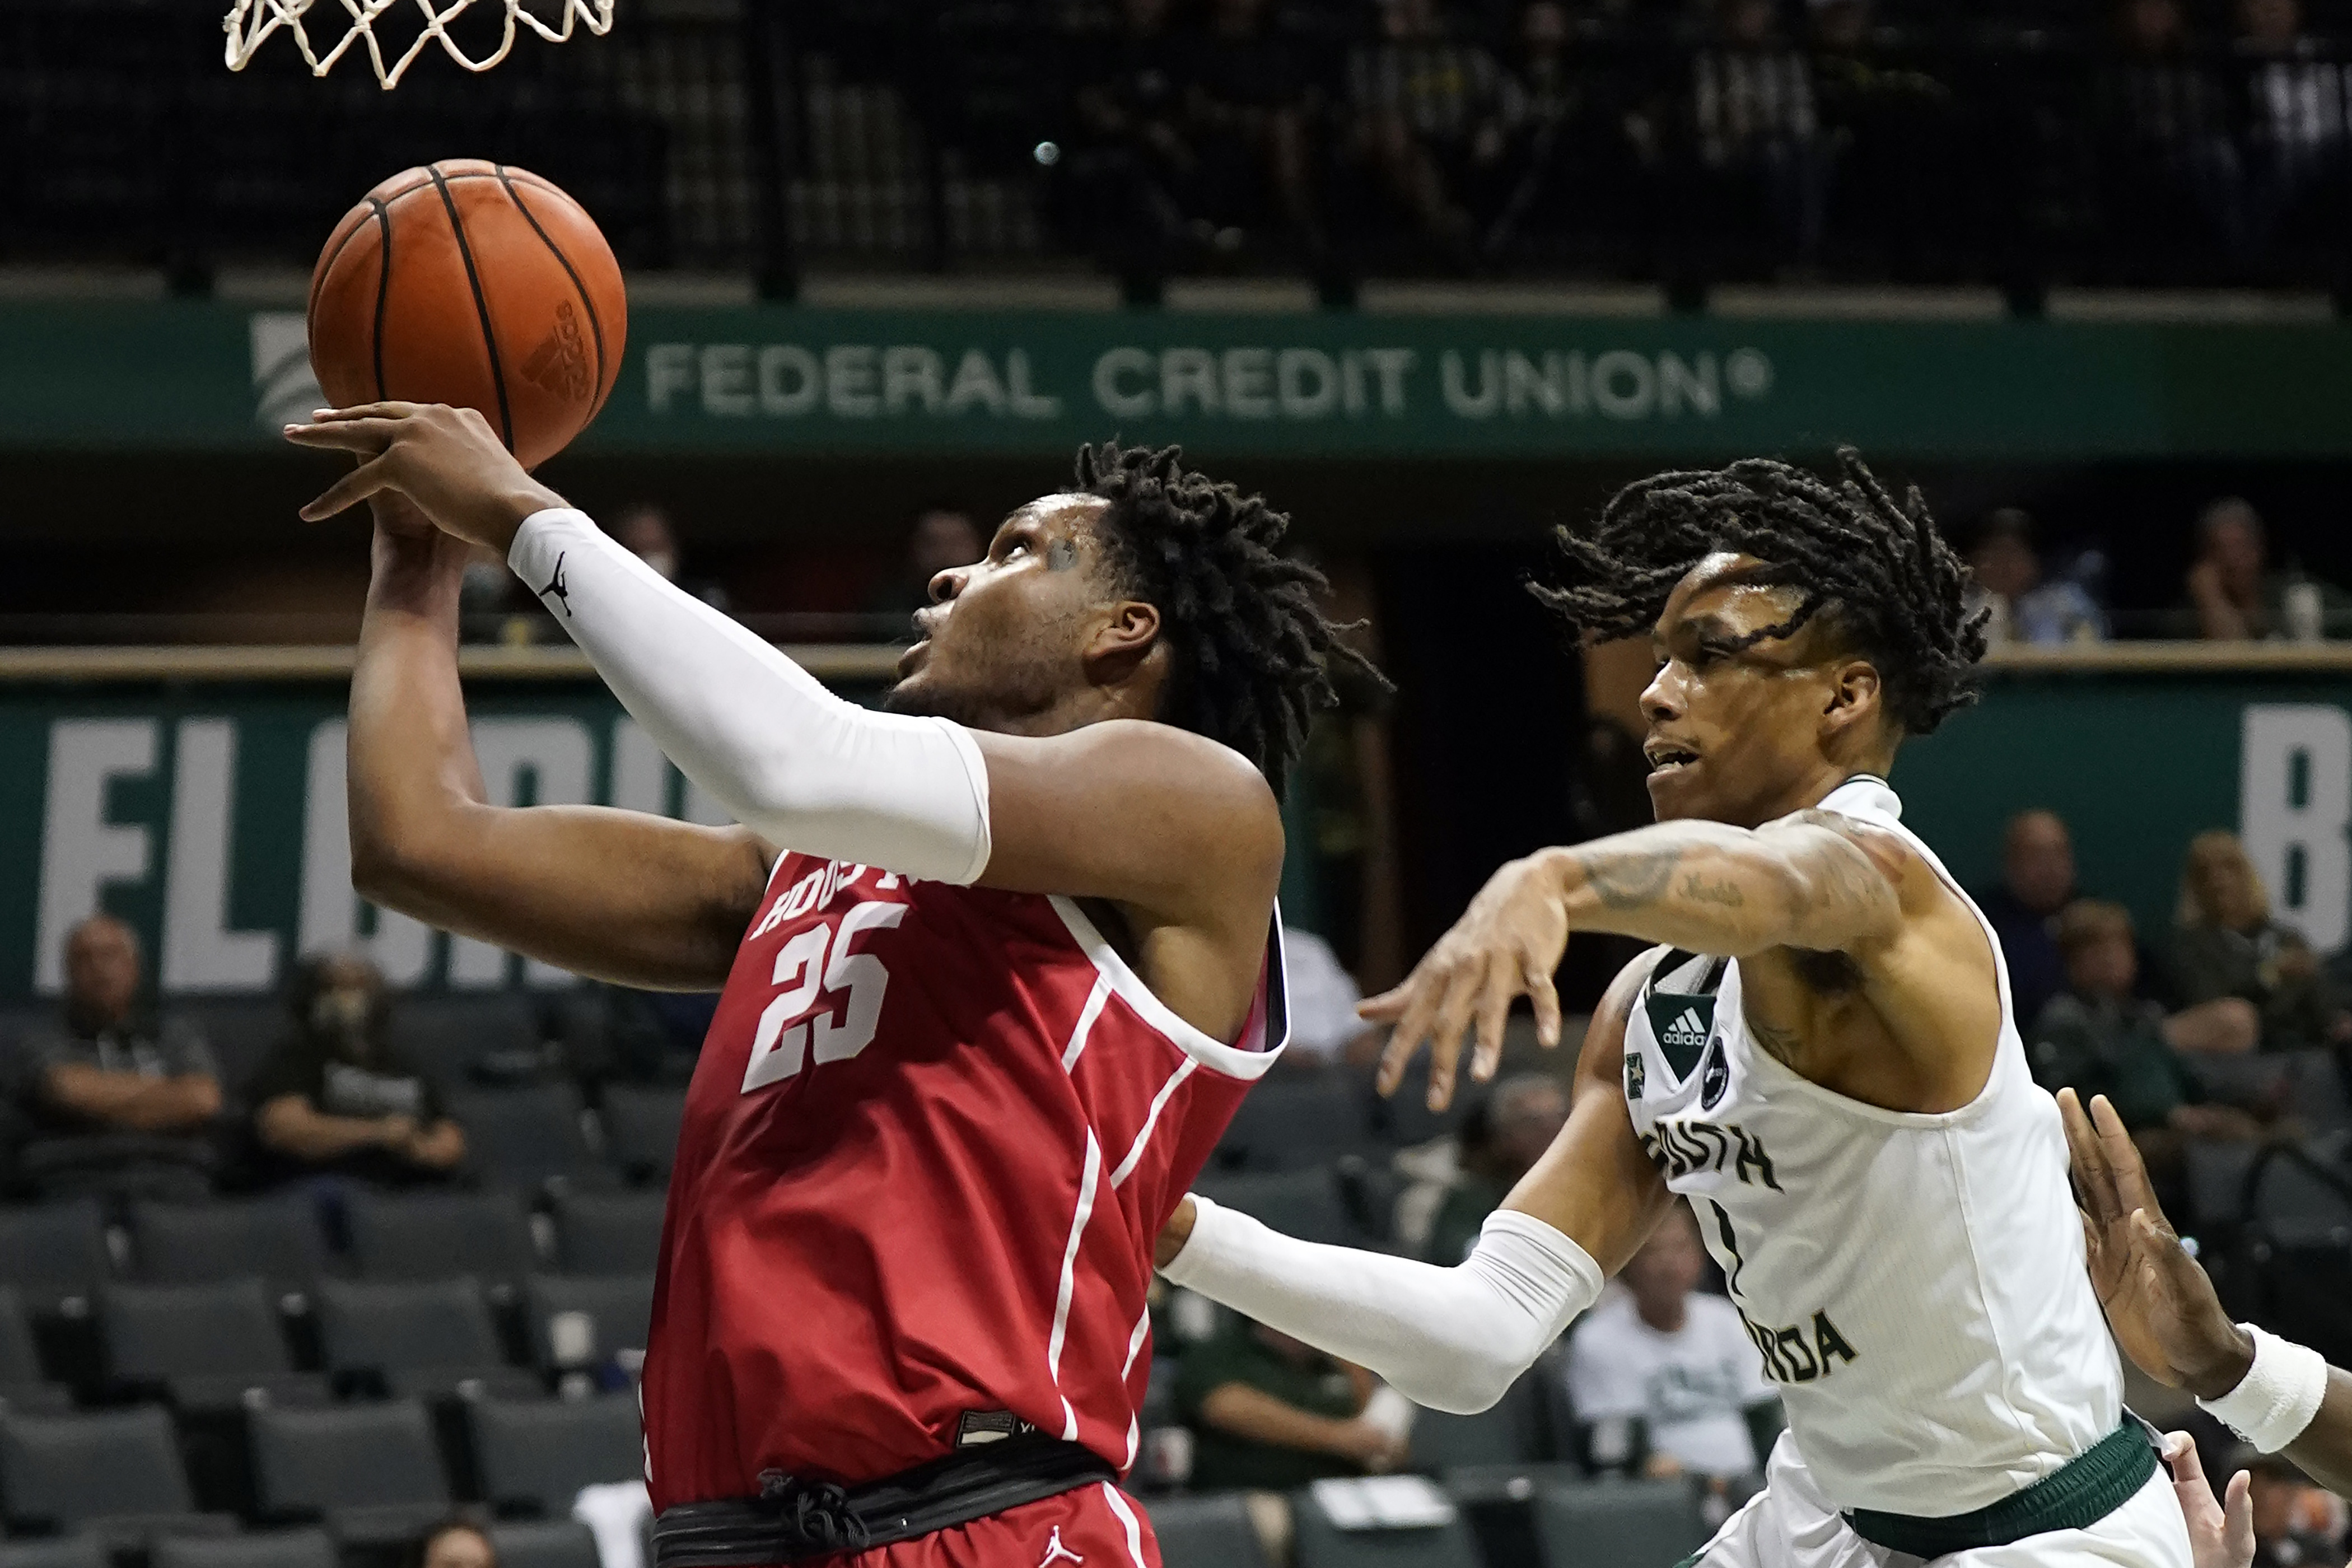 Looking Back: UH men's basketball top 5 performances of the 2019